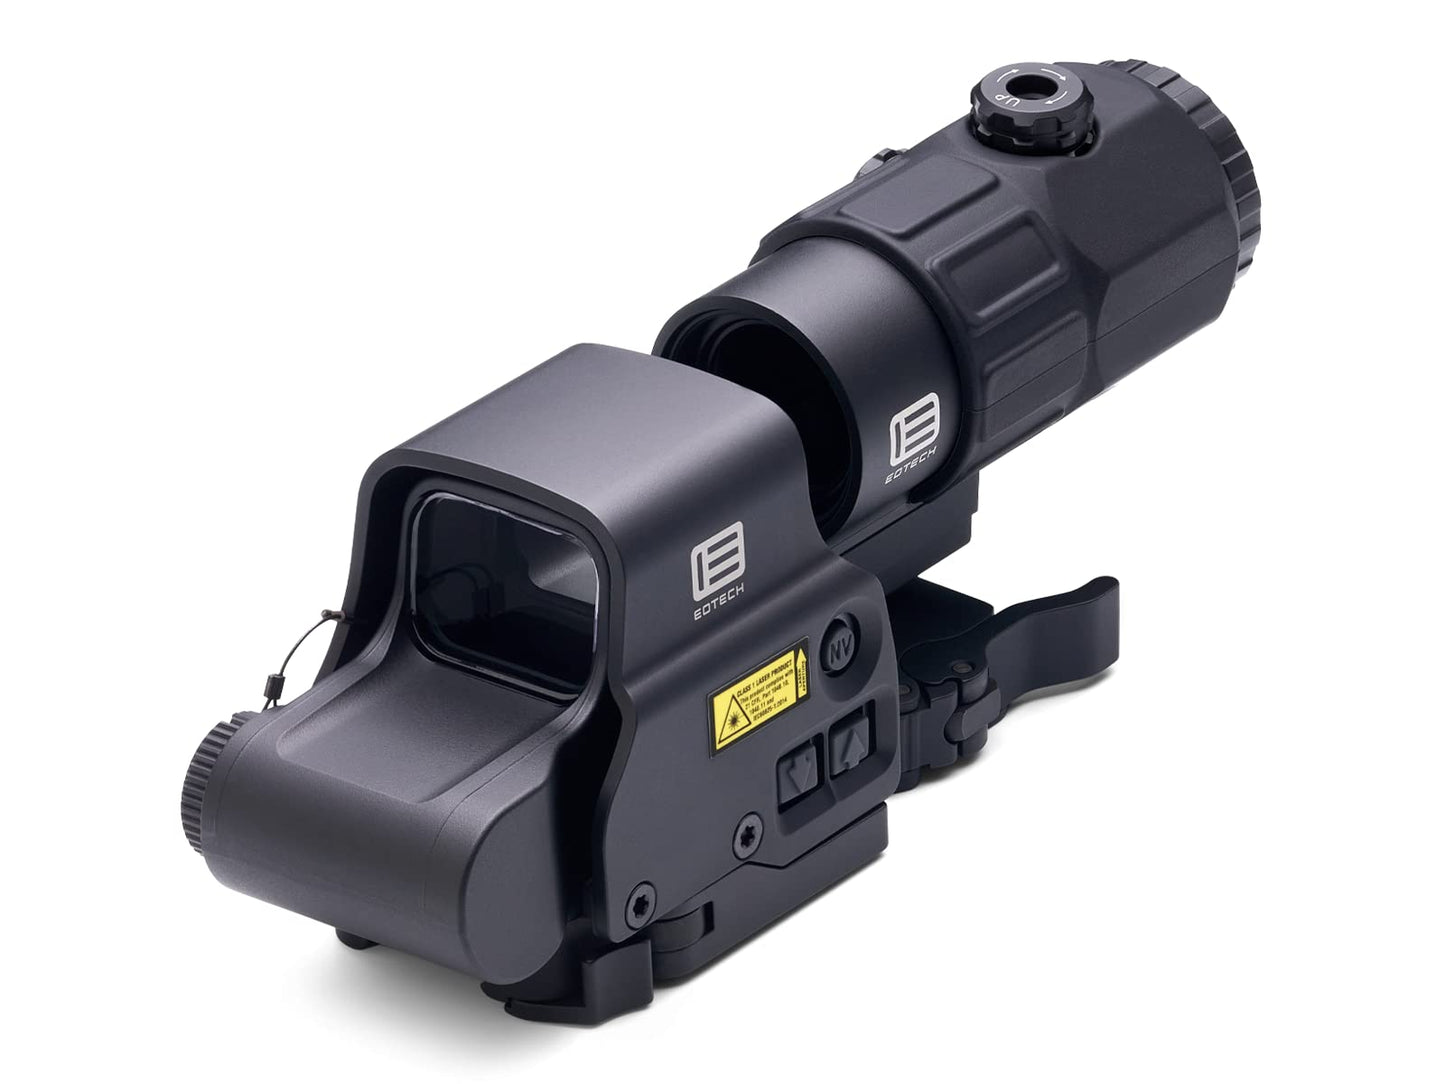 HHS V Holographic Hybrid Sight - EXPS3-4 with G45 Magnifier, 5 Power Magnifier with Quick Disconnect, Switch to Side (STS) Mount in Black